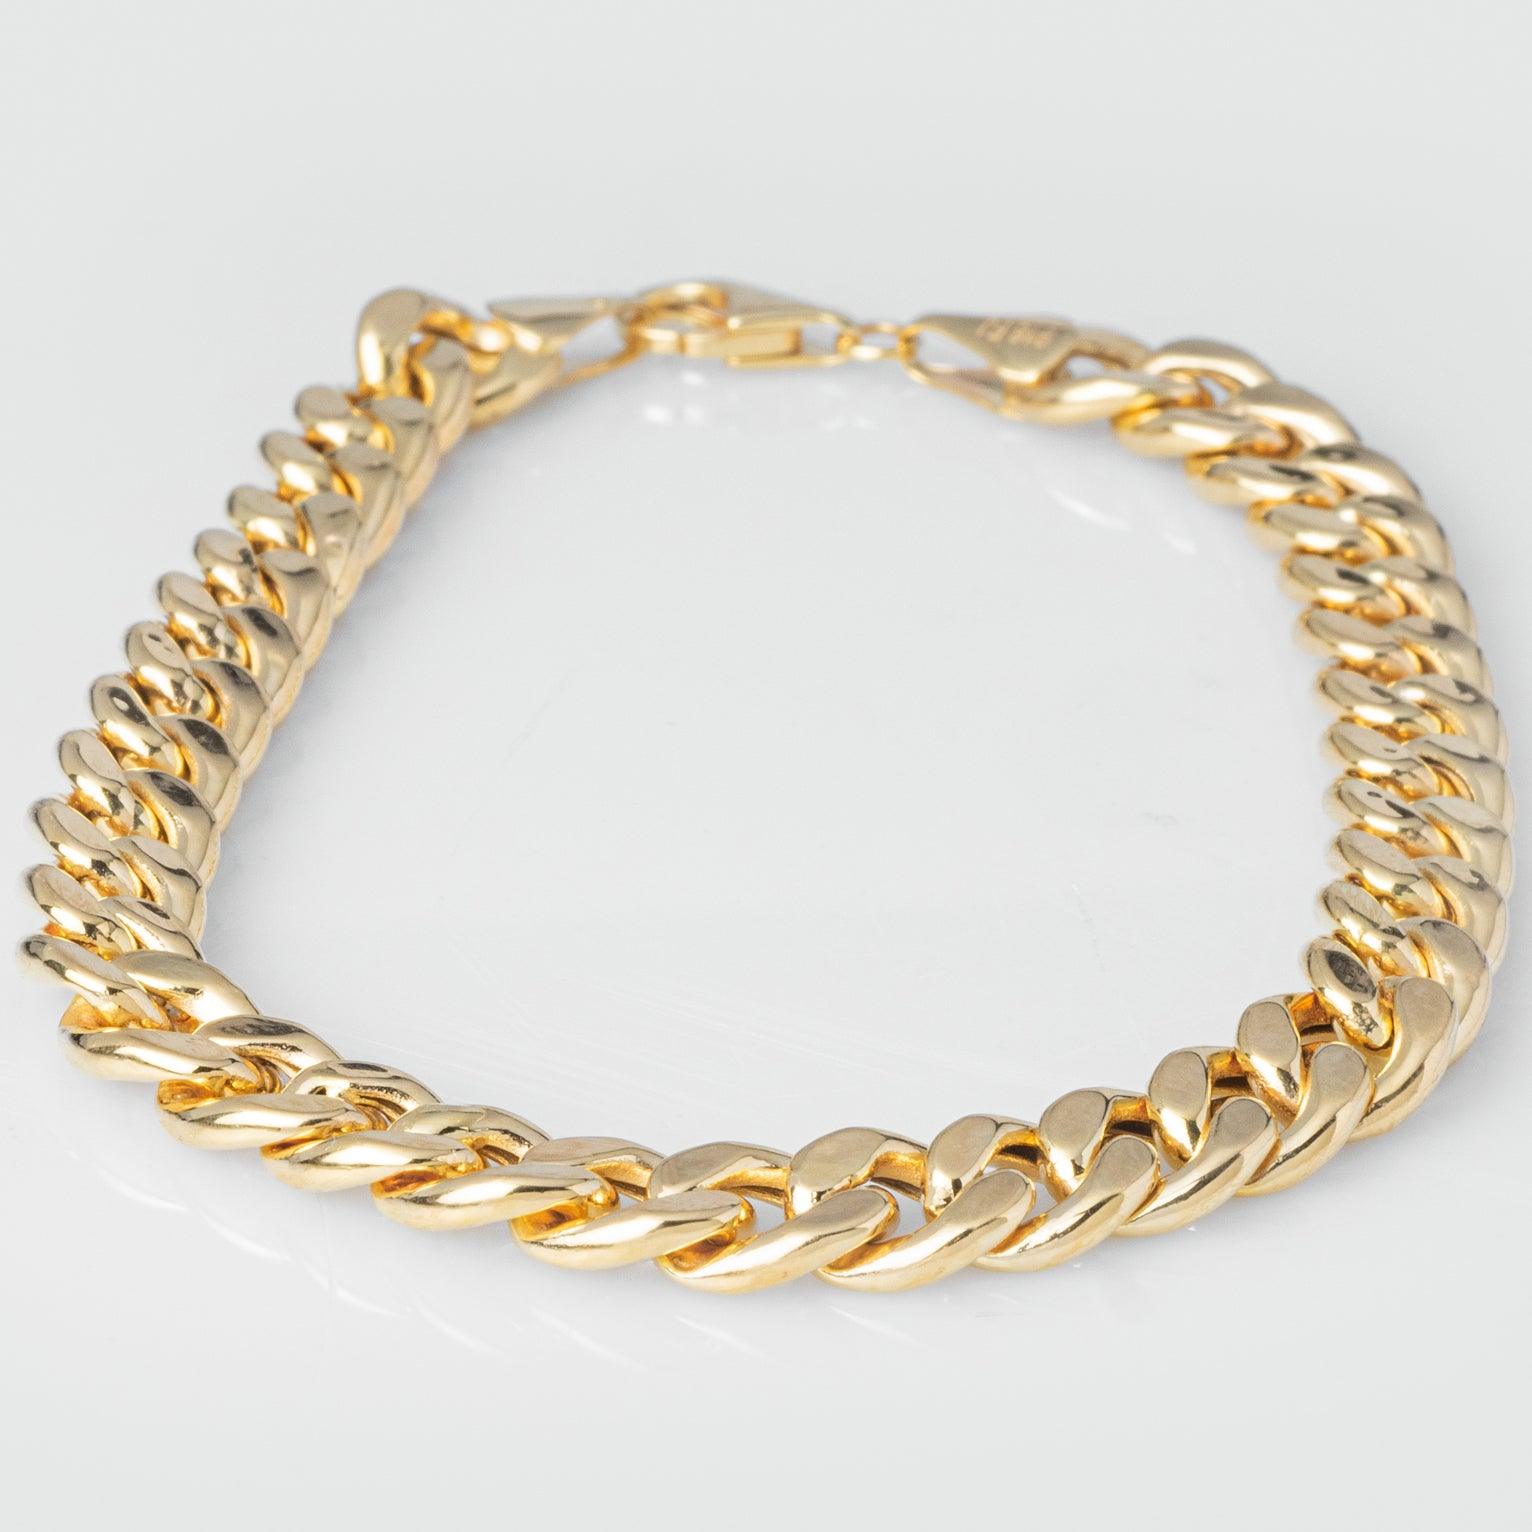 22ct Gold Curb Link Gents Bracelet with Mirror Finish fitted with a Lobster Clasp (15.4g) GBR-8044 - Minar Jewellers